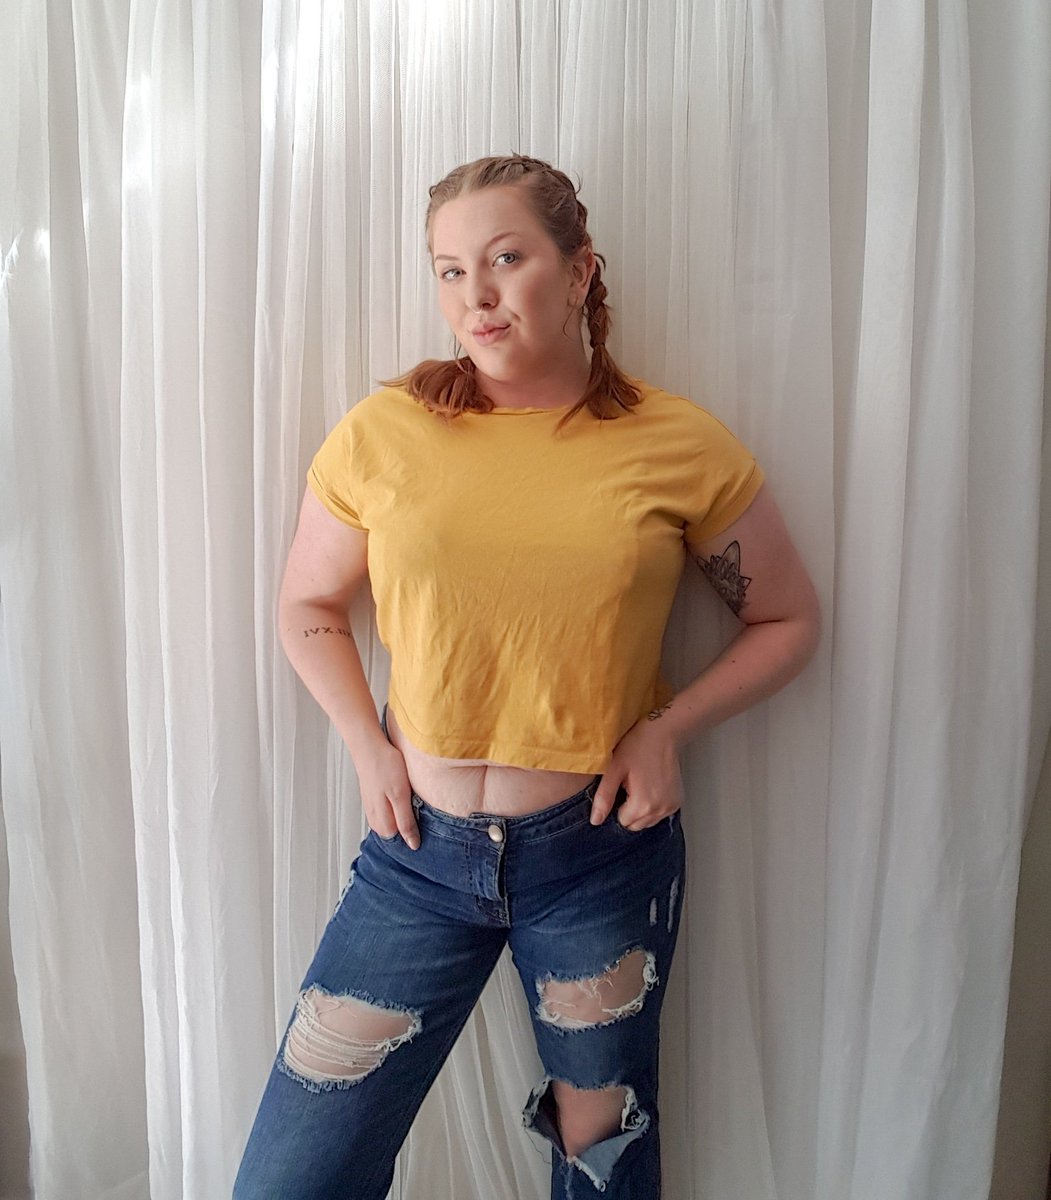 Tryna be more #confident in my #postpartumbody I may not love my squishy belly, but that wont stop me from wearing what I want! #postpartumbodylove #bodypositive #bodypositivity #lovetheskinyourein